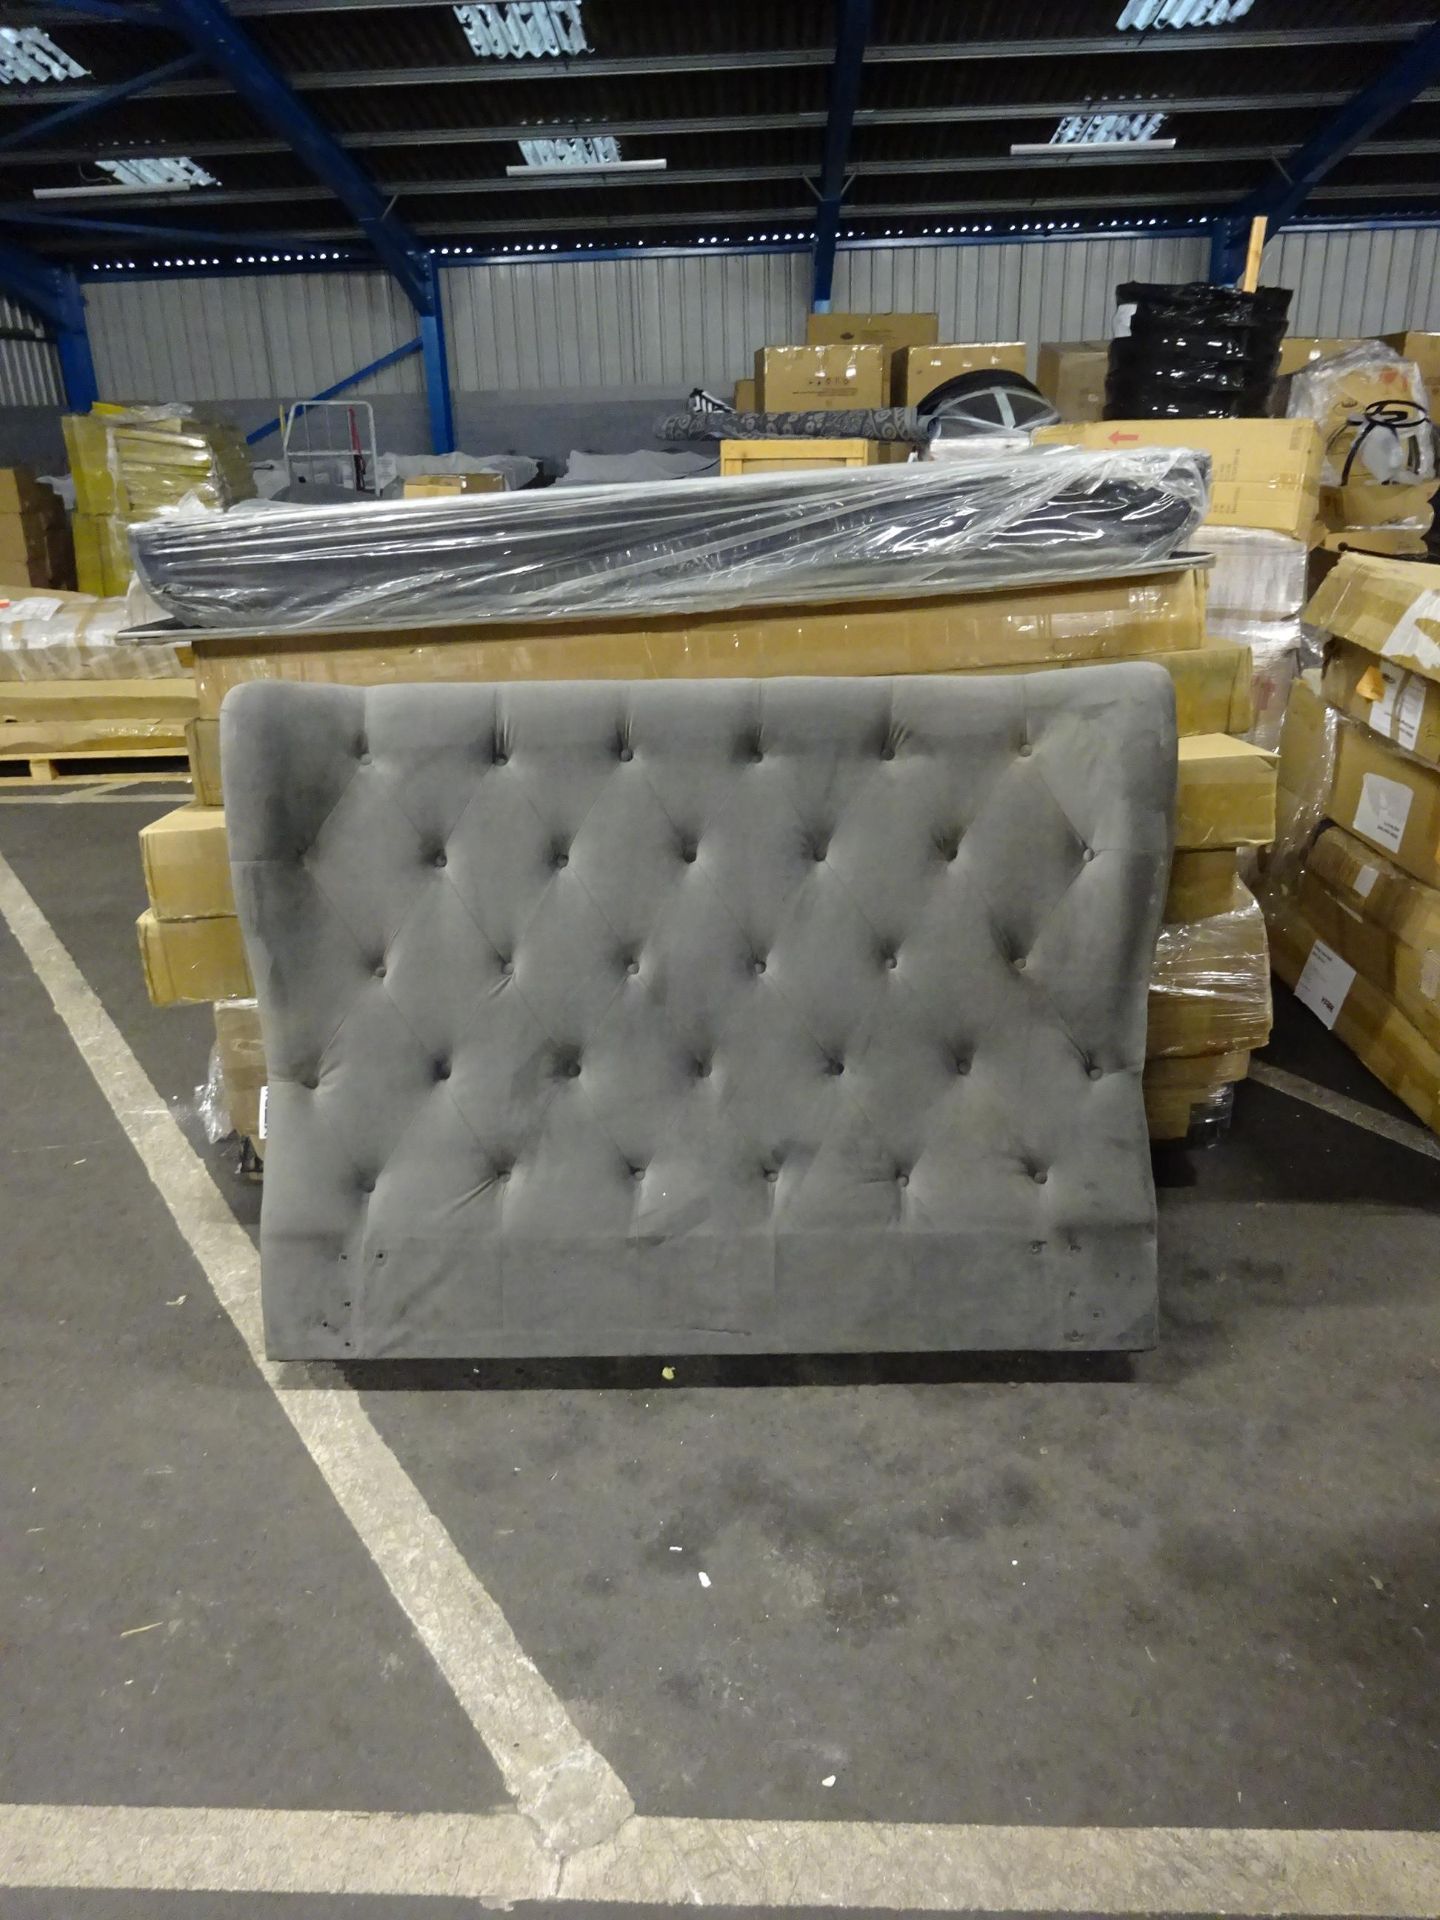 OVER £7000 OF YARK BED BASES & HEADBOARDS - Bulk Quantity of Customer Return Beds | Approx Value £7